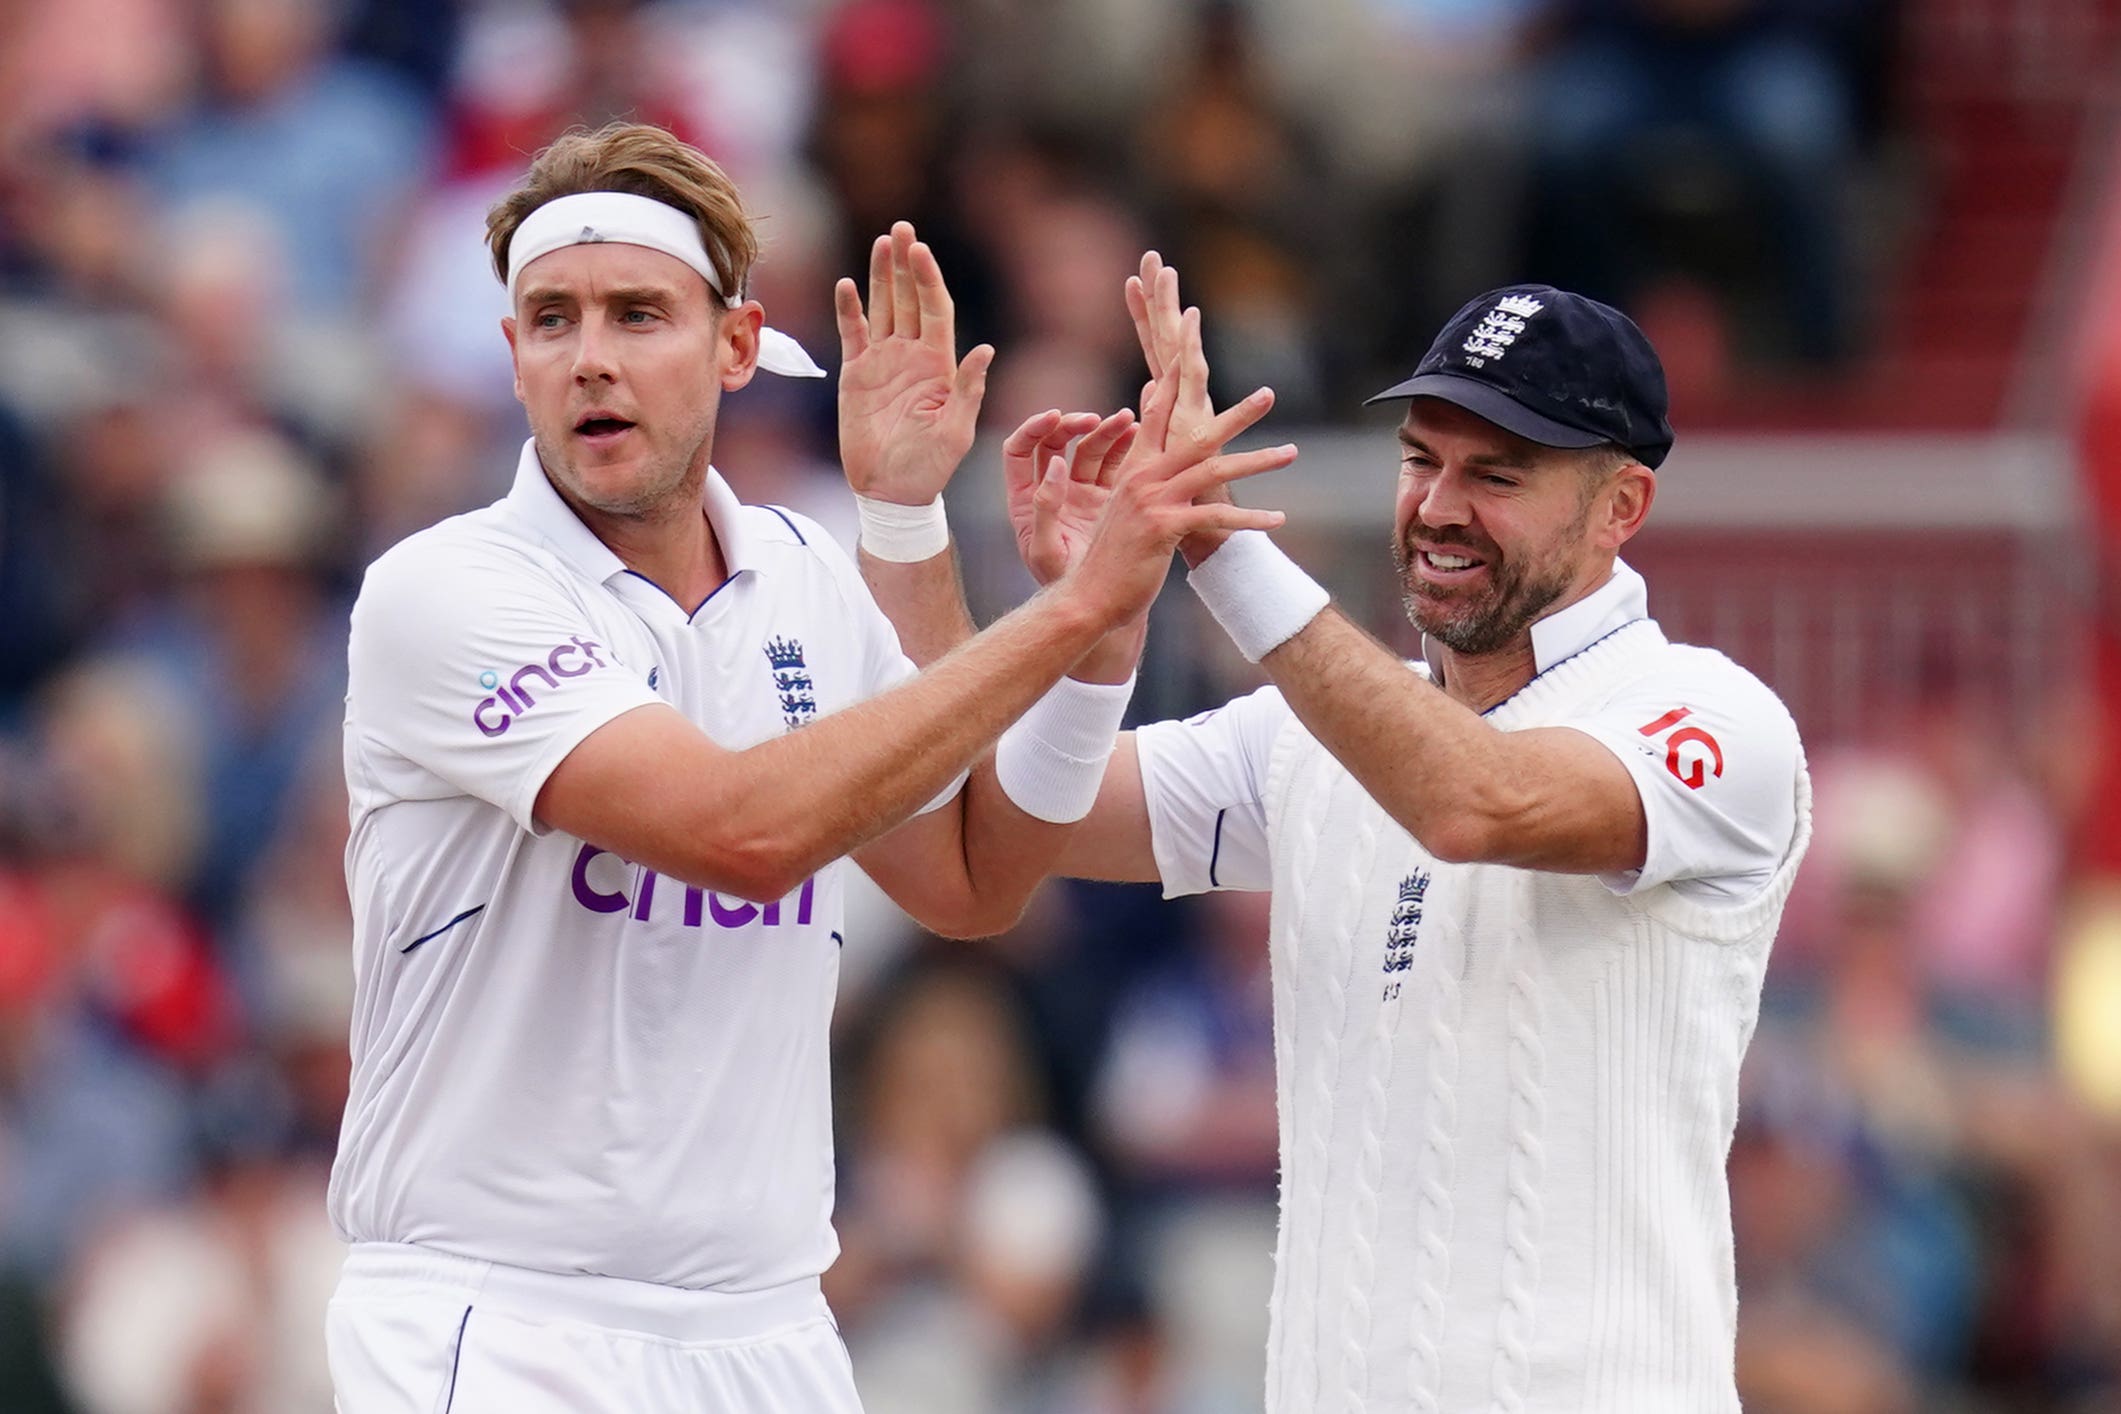 Stuart Broad (left) and James Anderson (right) formed a deadly seam duo for England over many years